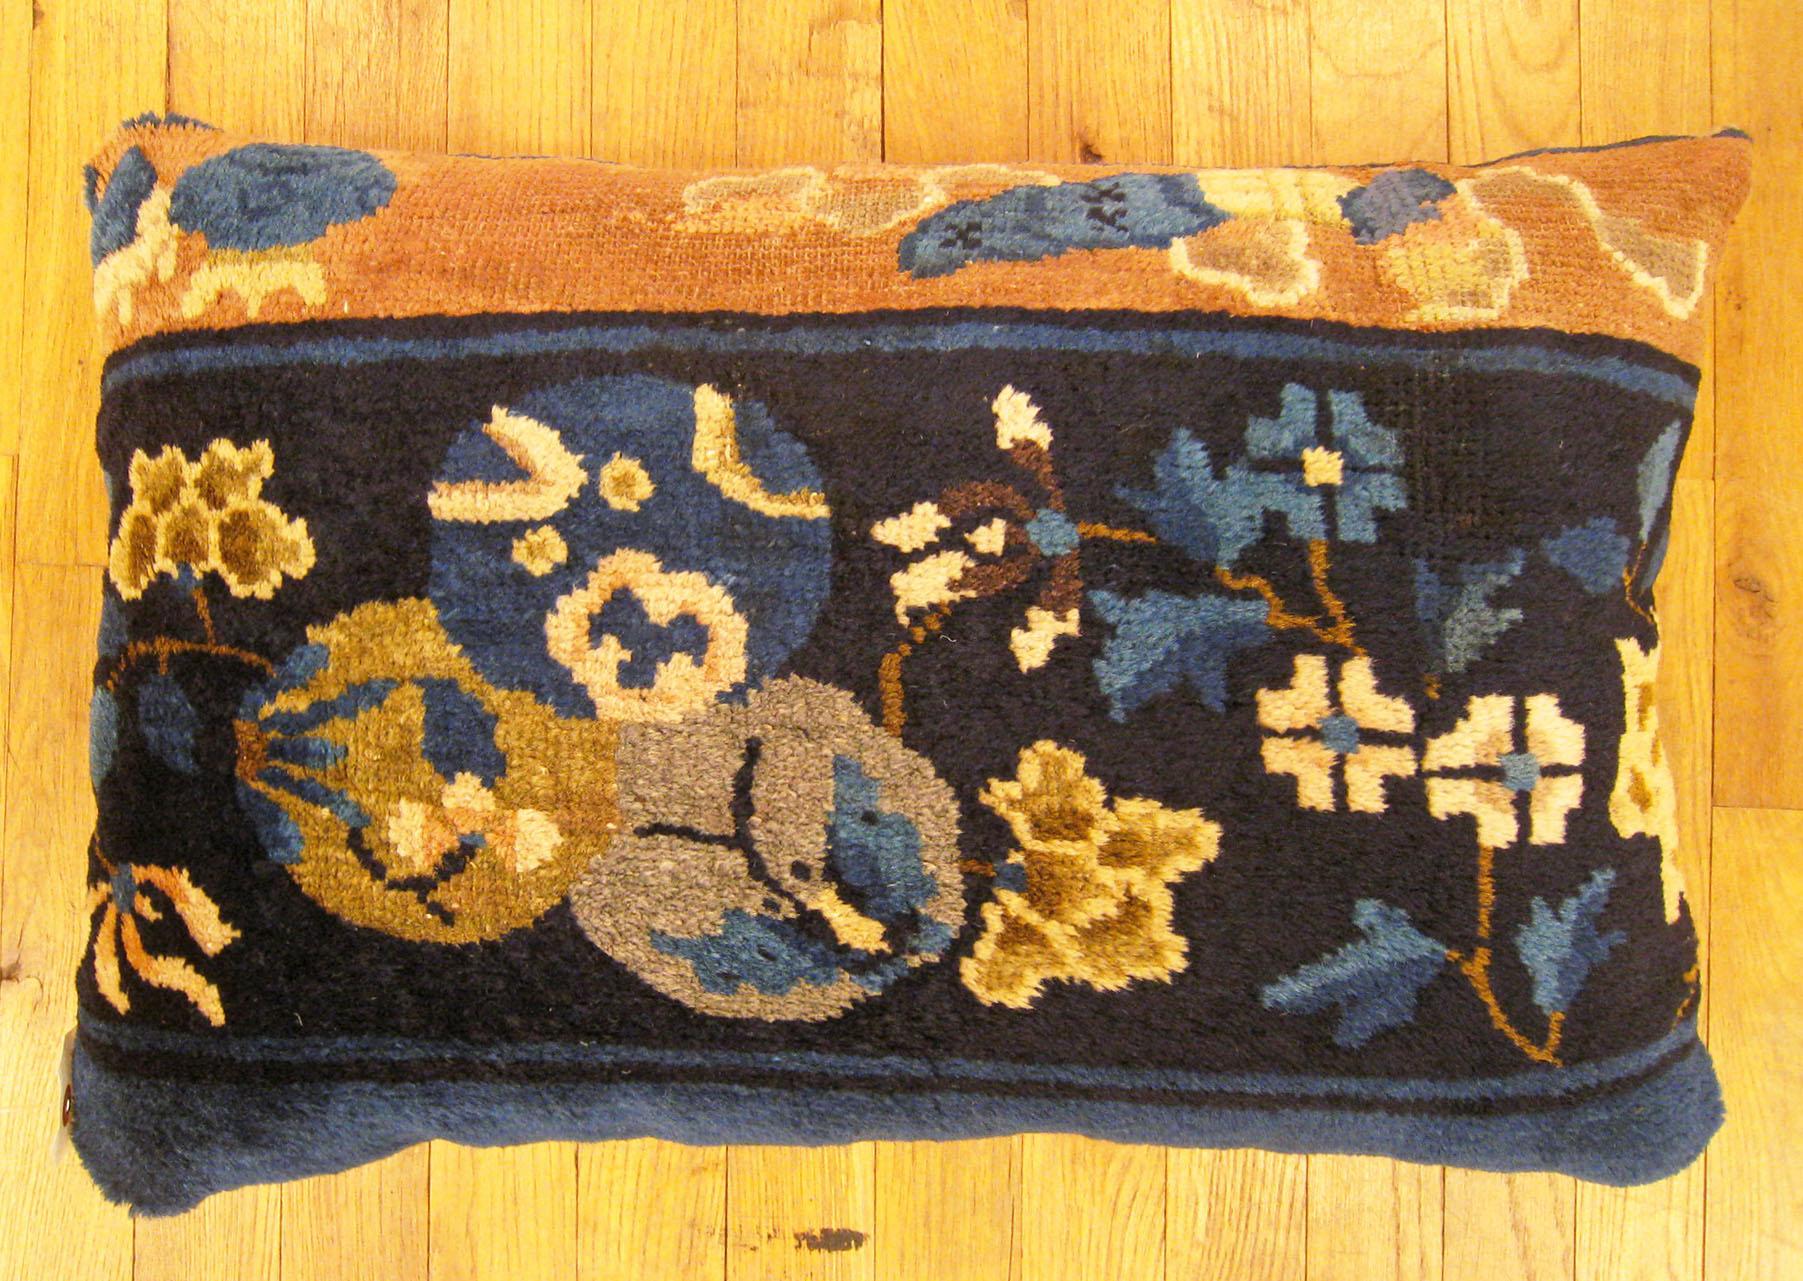 Antique Chinese Pillow; size 24” x 16” (2’ 0” x 1’ 4”). 

An antique decorative pillow with floral elements in an art deco style in a navy central field, size 24” x 16” (2’ 0” x 1’ 4”). This lovely decorative pillow features an antique fabric of a